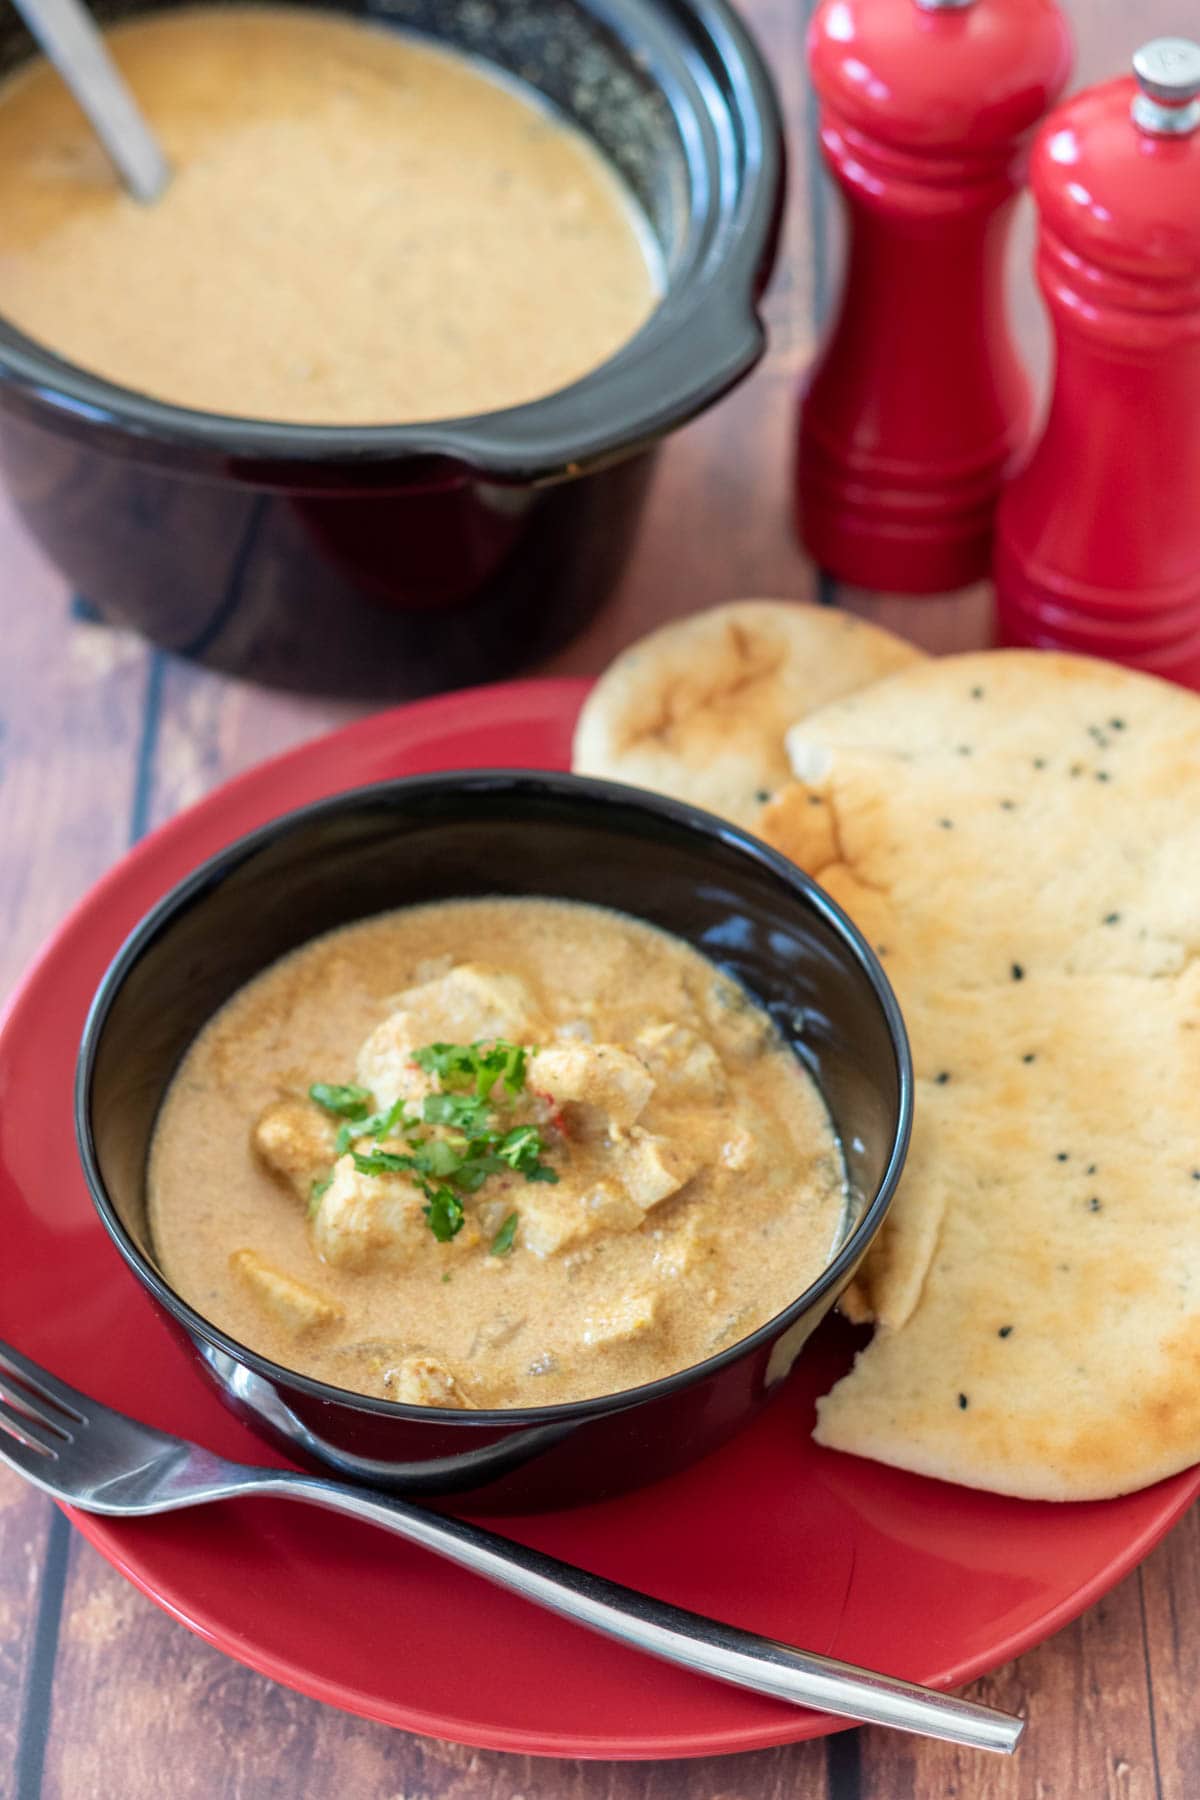 Easy slow cooker chicken curry served in a bowl garnished with coriander and a naan bread alongside. Slow cooker in the background.